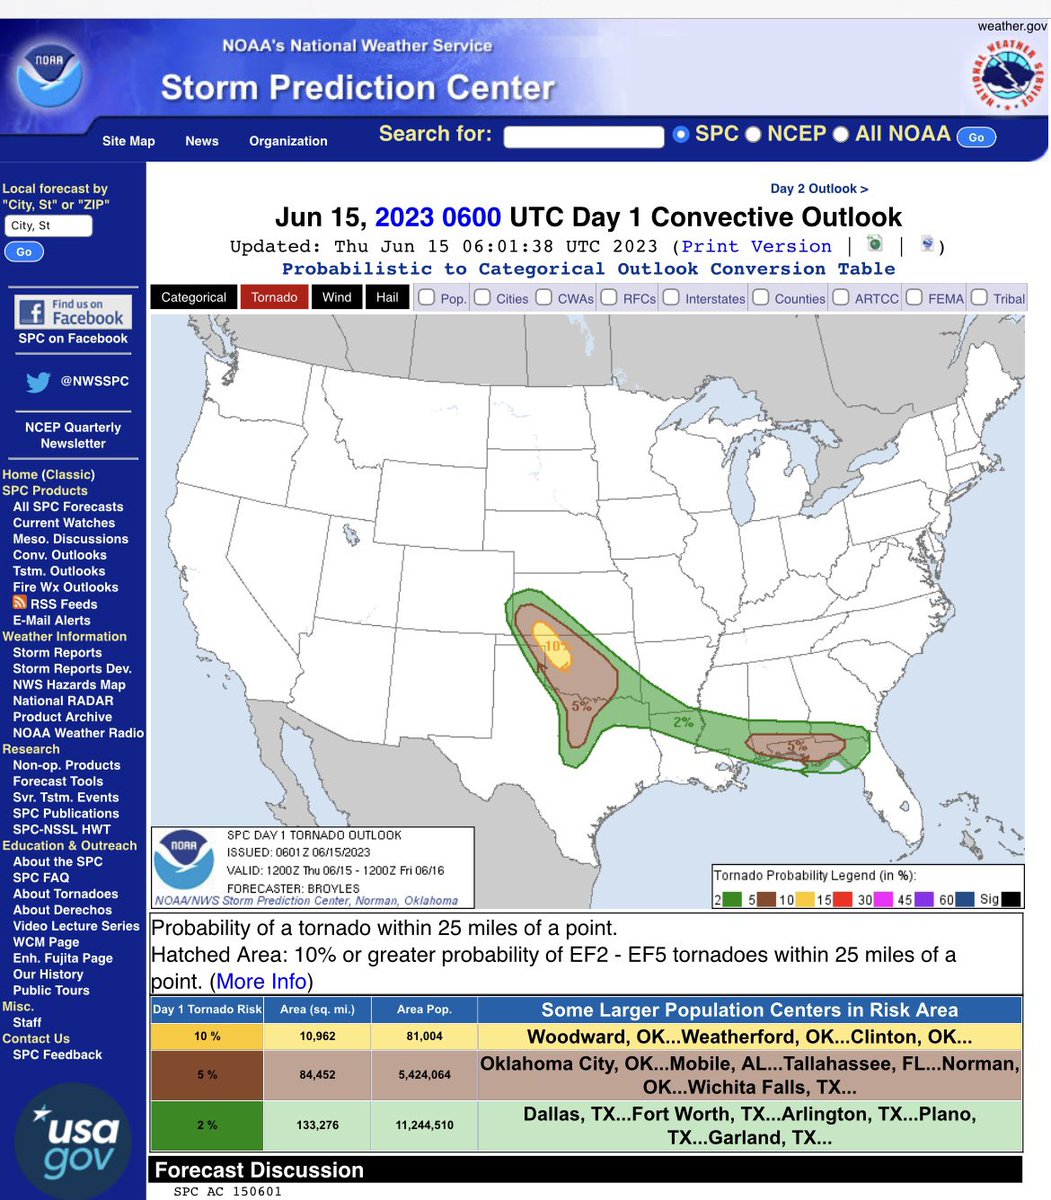 I had not seen a moderate risk in 2 months of outlooks. Now twice in 2 days. 

More likely tornado day or derecho day?

#wxtwitter #okwx #txwx